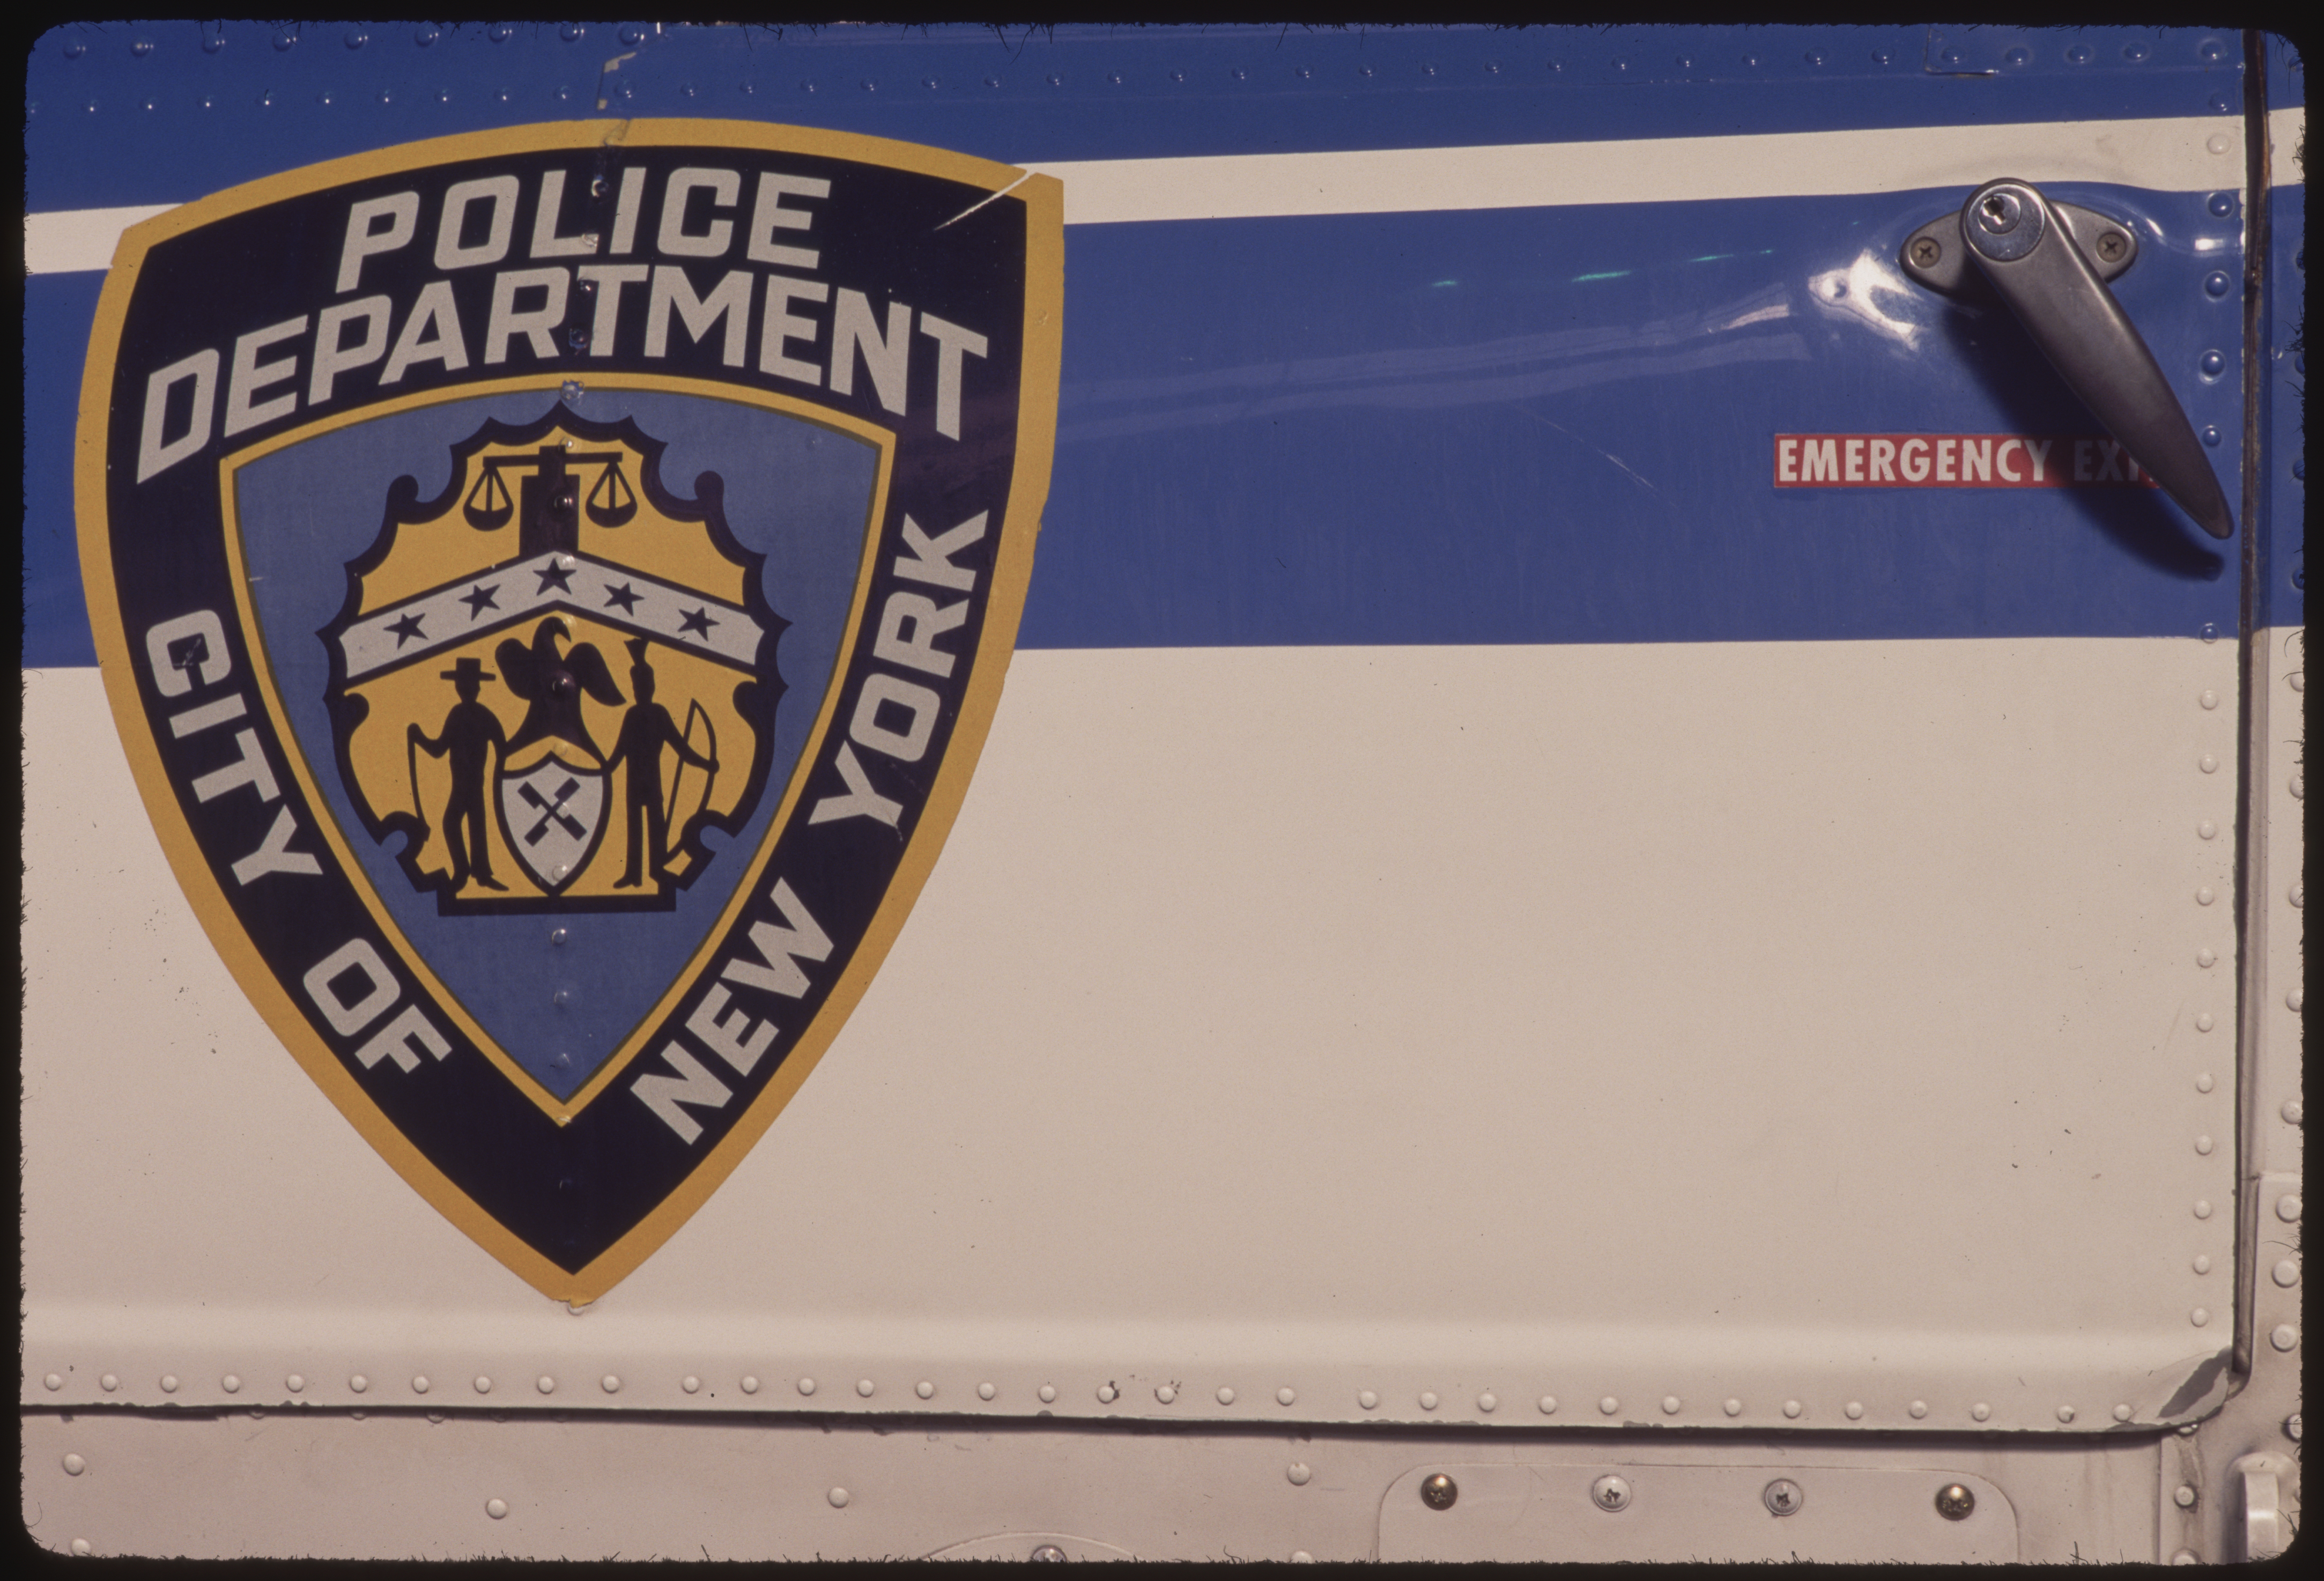 A New York Police Department emblem reading "POLICE DEPARTMENT, CITY OF NEW YORK" is displayed on the side of an NYPD Aviation Unit helicopter in Manhattan.